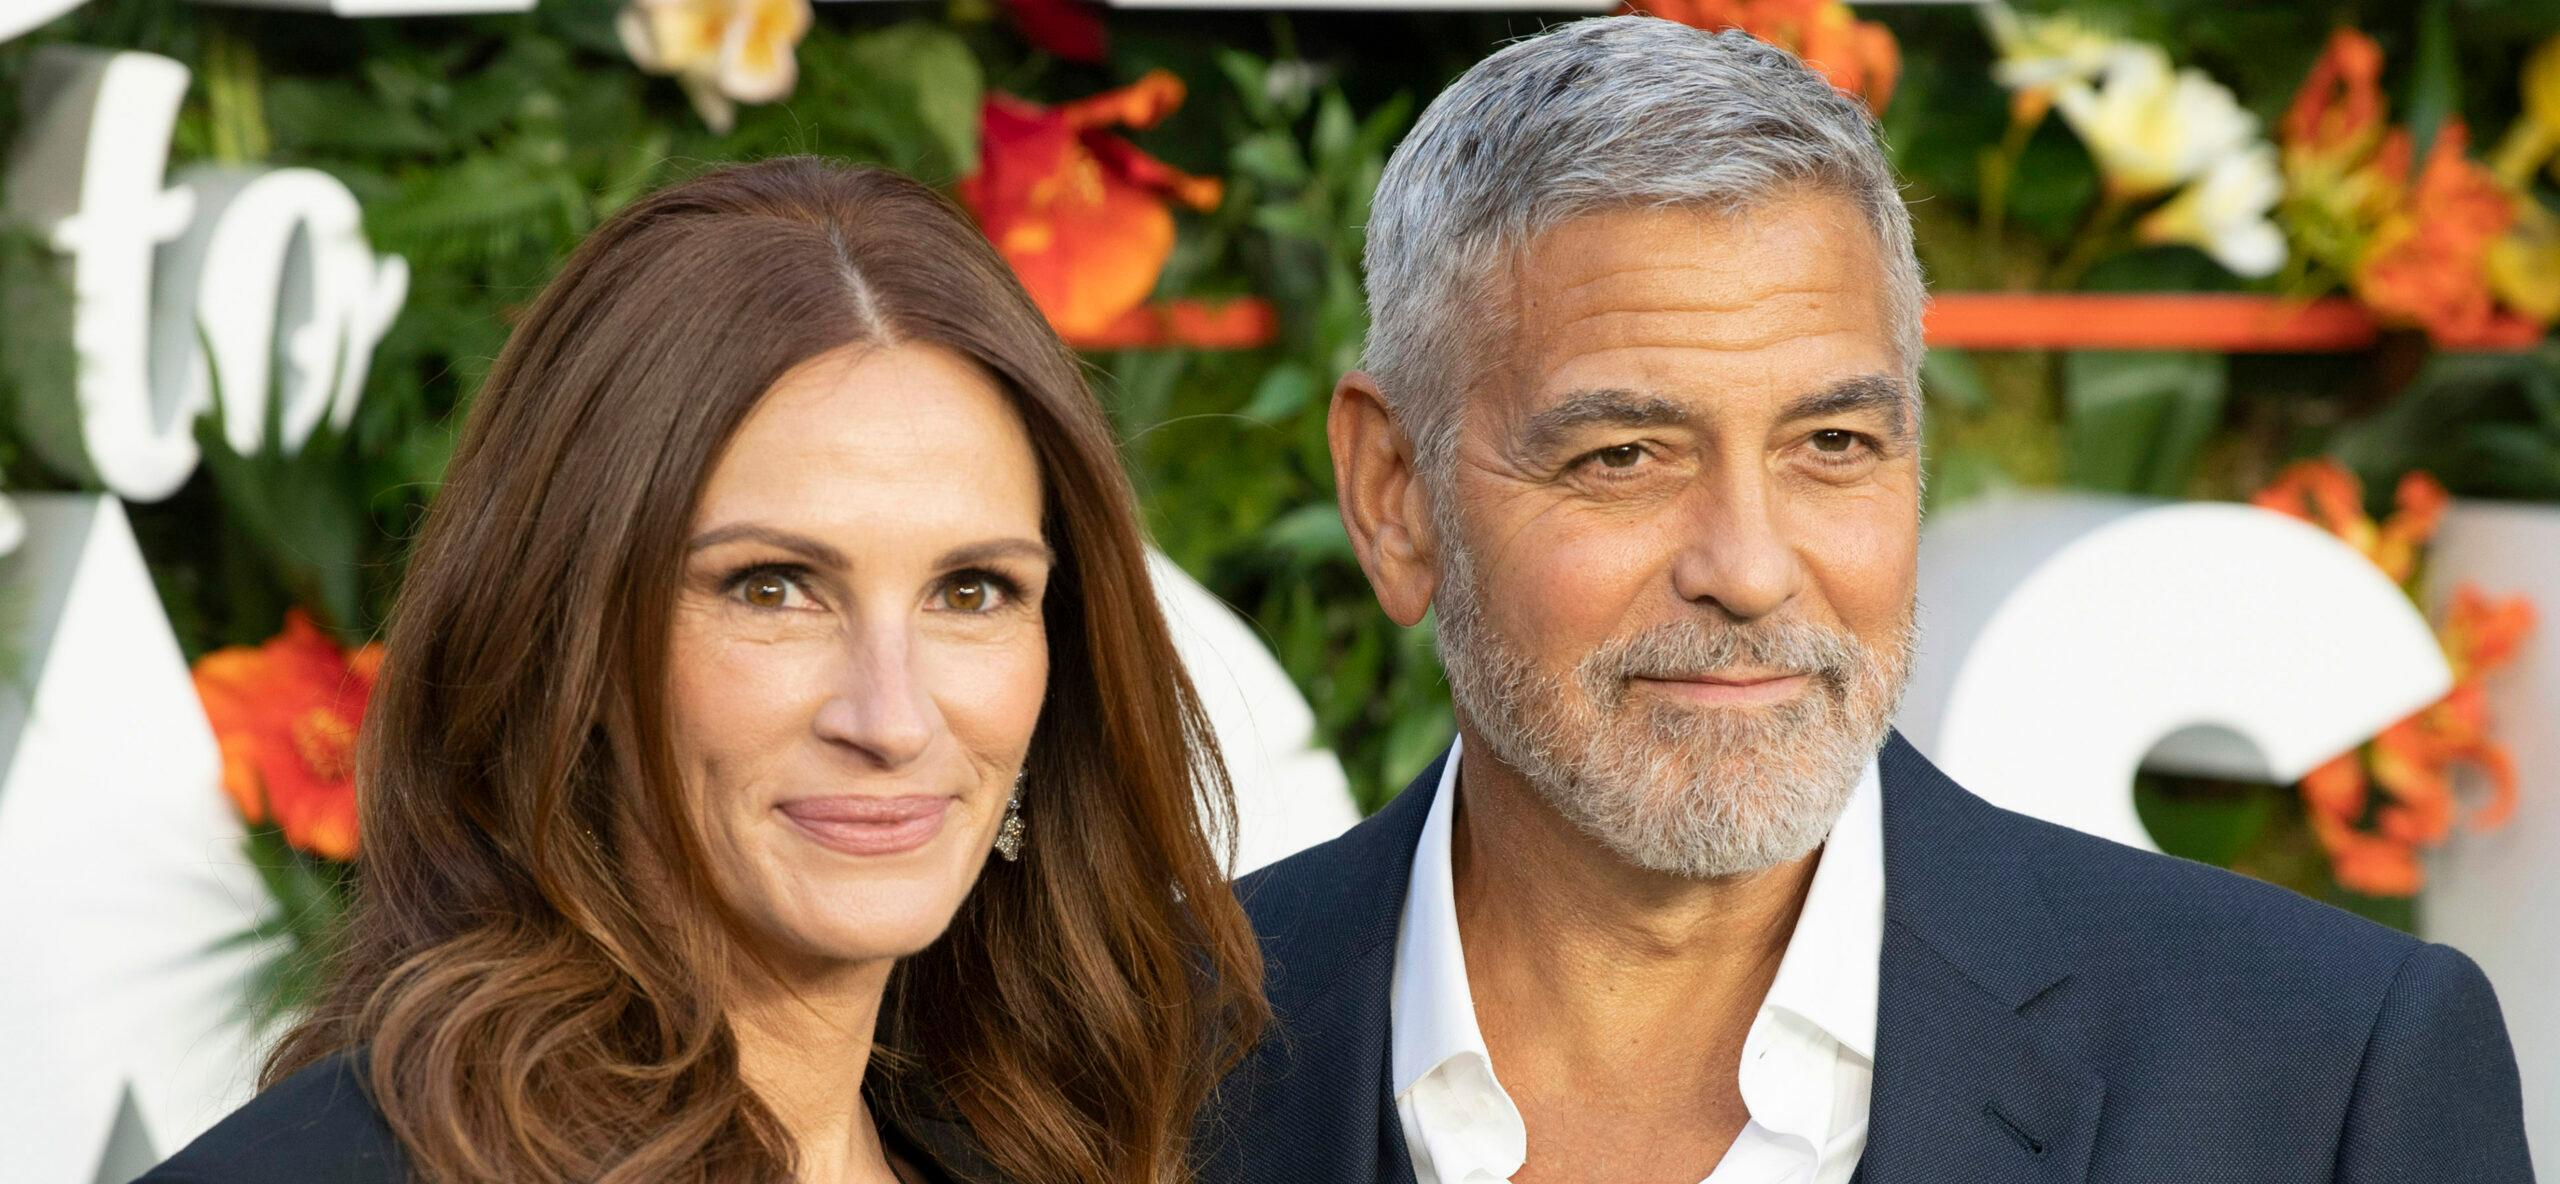 Julia Roberts and George Clooney at the ‘Ticket to Paradise’ World Premiere at the Odeon Luxe, Leicester Square, London UK.